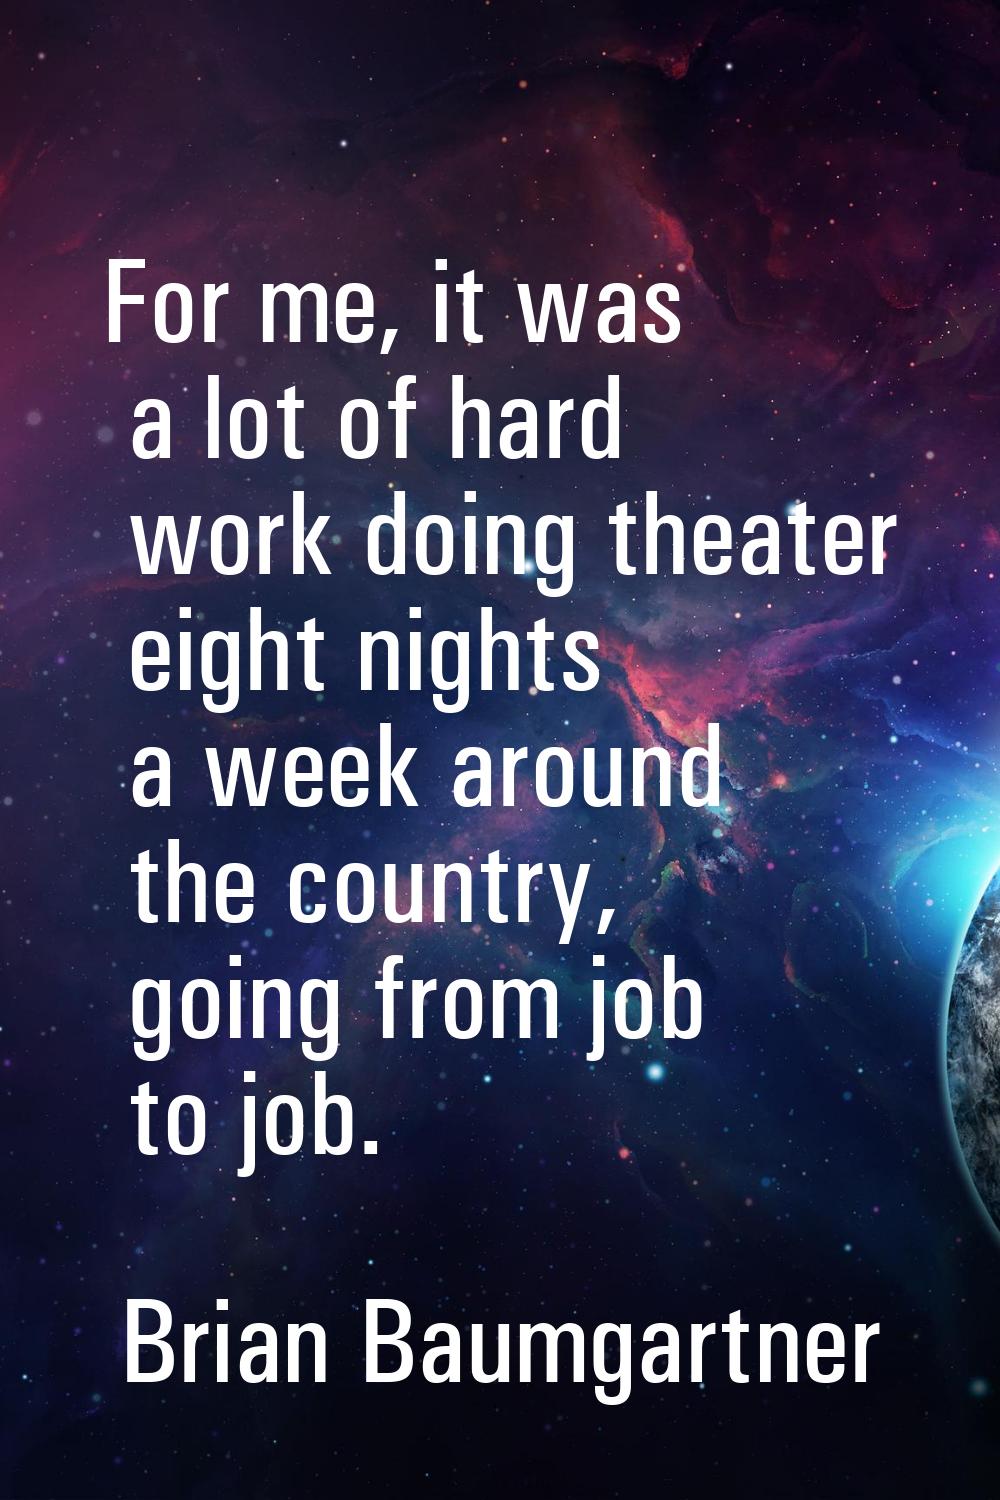 For me, it was a lot of hard work doing theater eight nights a week around the country, going from 